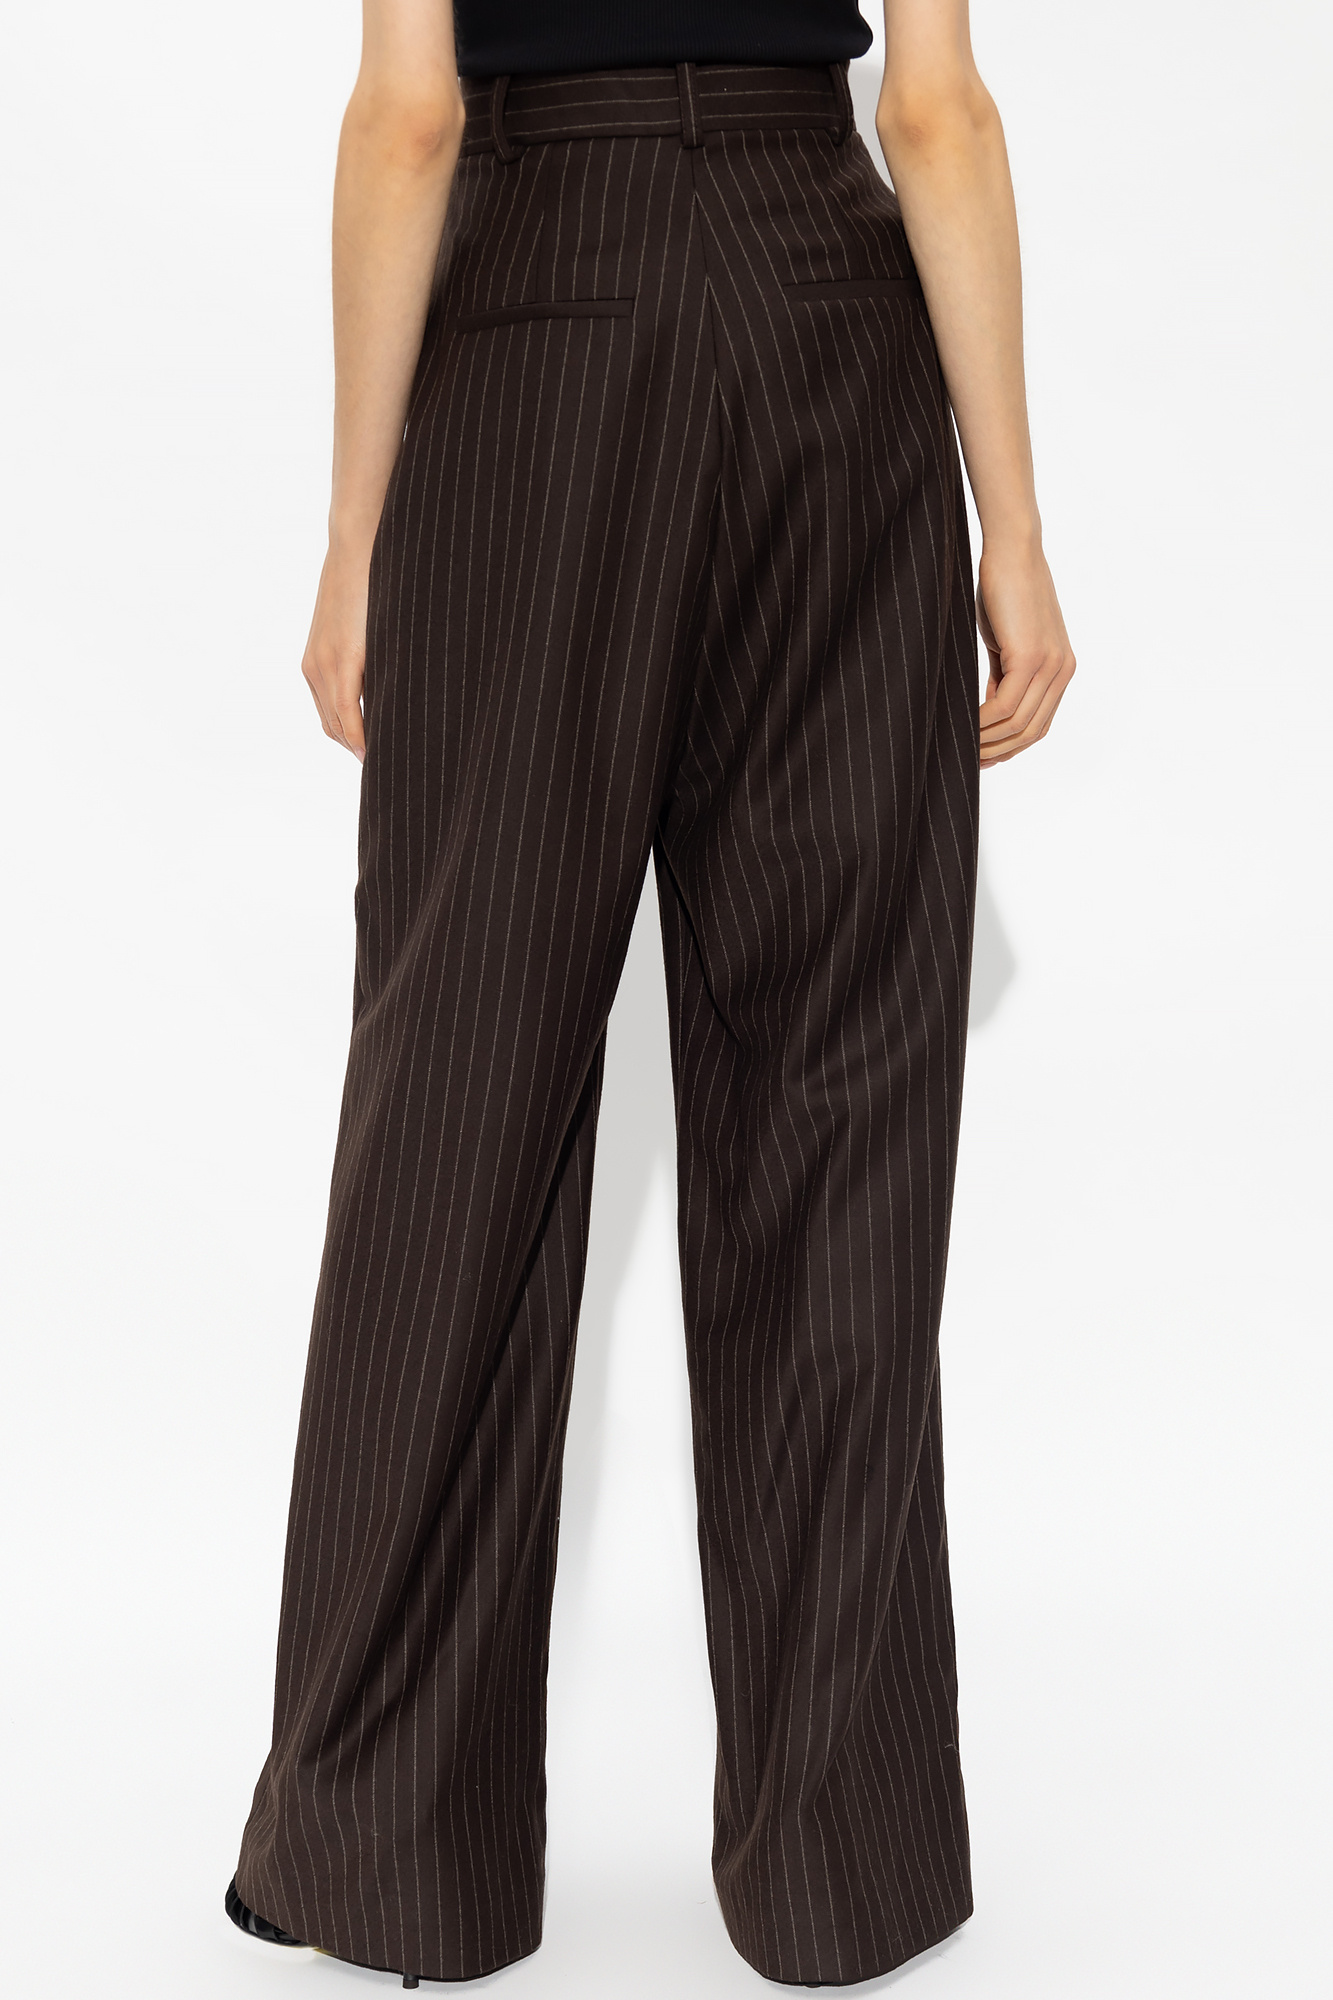 The Mannei ‘Jafr’ pleat-front and trousers